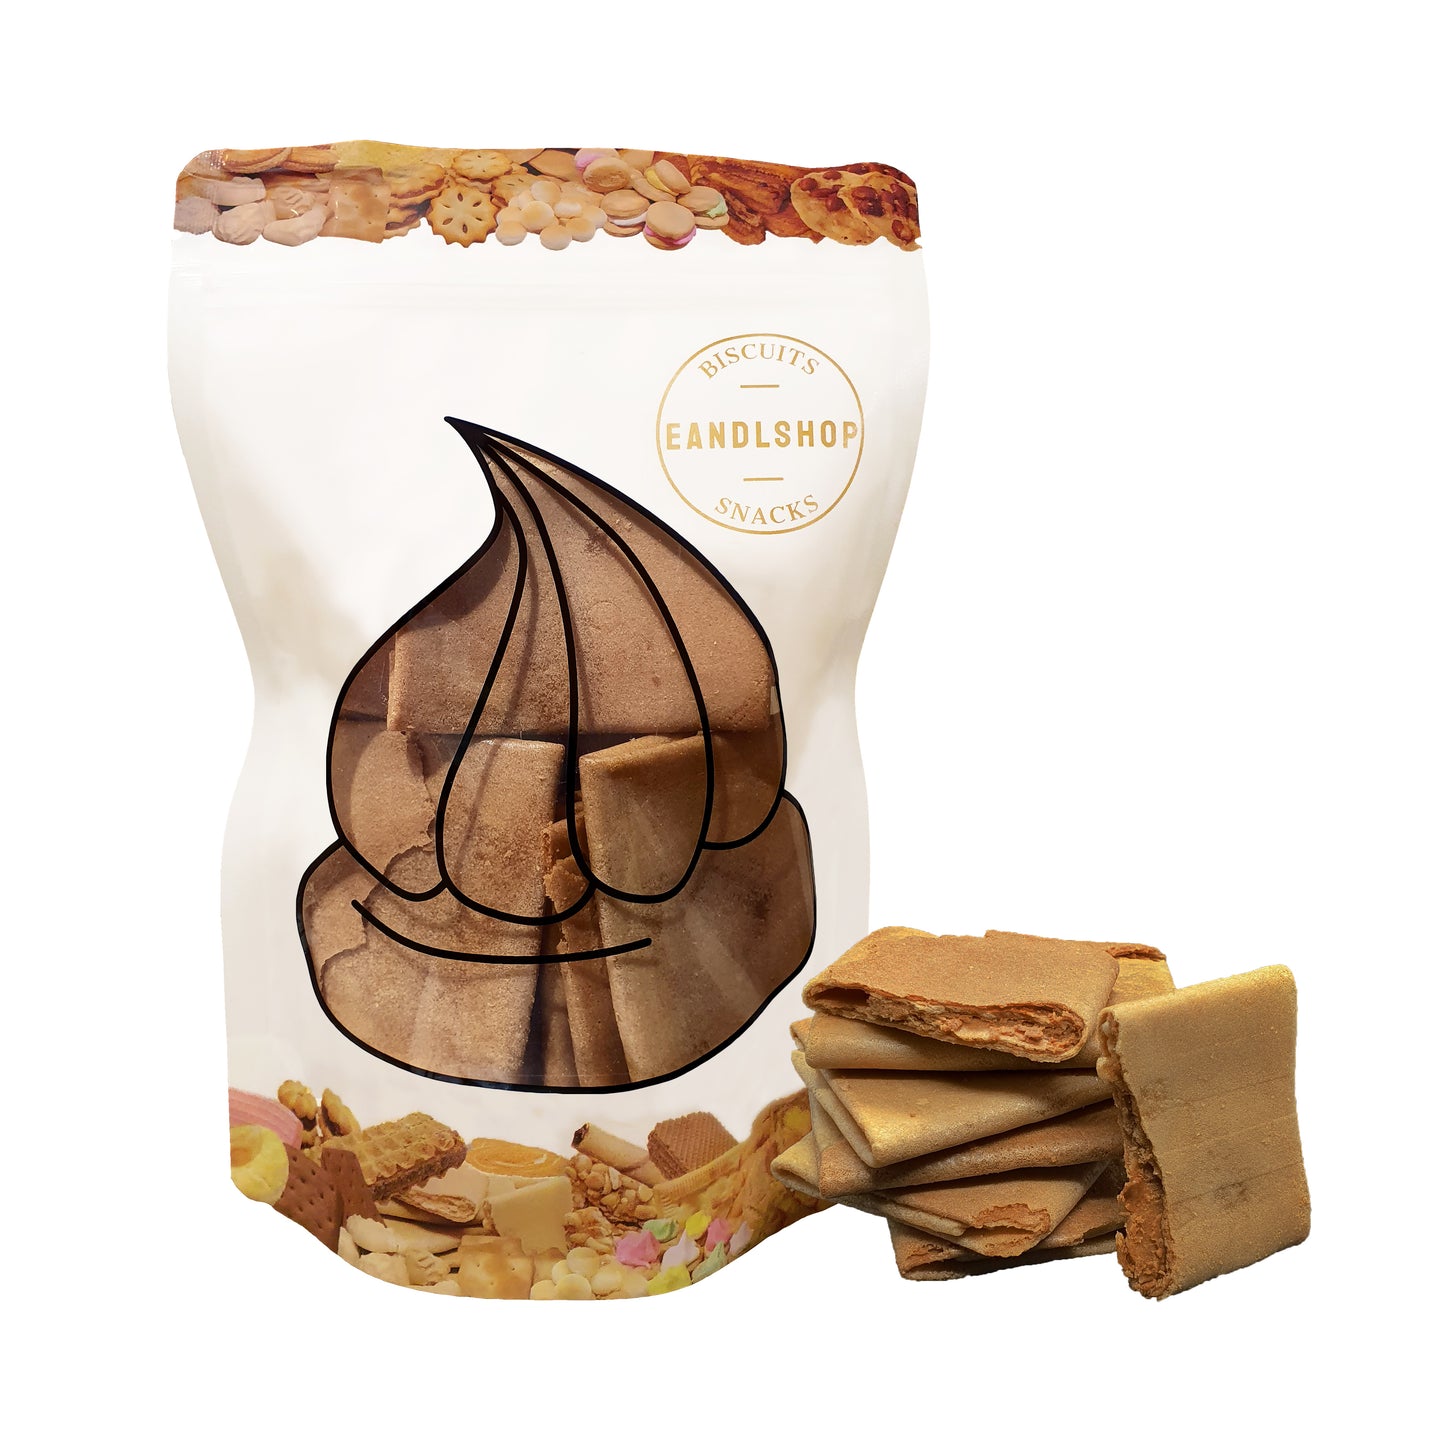 Pillow Wafer (Peanut). Old-school biscuits, modern snacks (chips, crackers), cakes, gummies, plums, dried fruits, nuts, herbal tea – available at www.EANDLSHOP.com